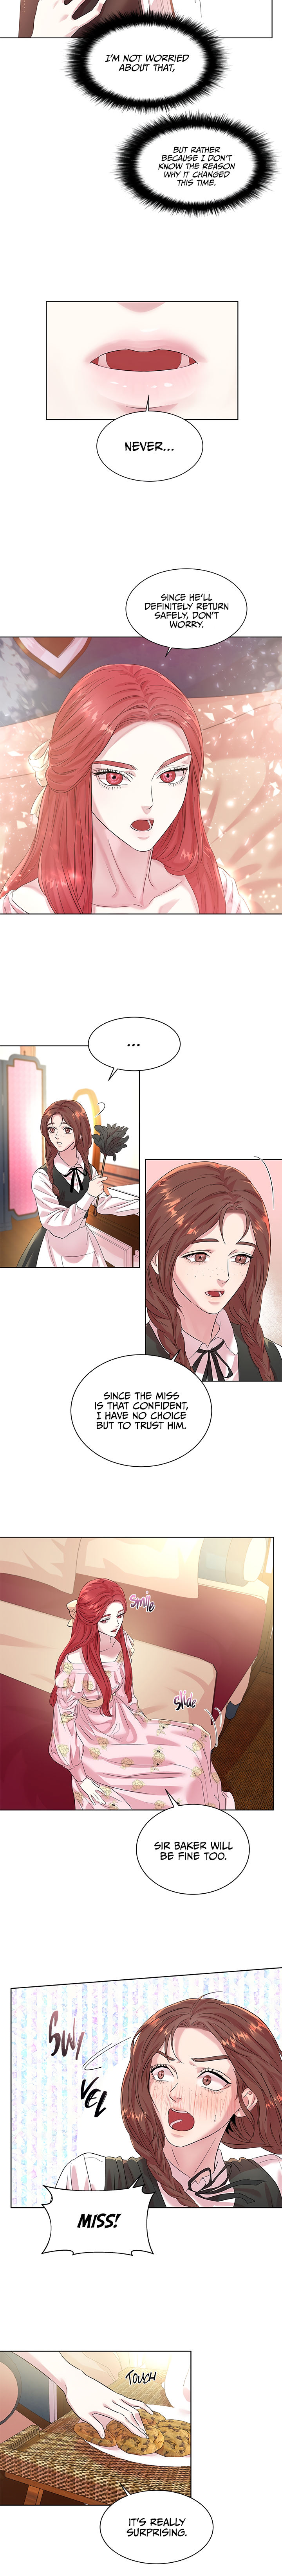 Aideen - Chapter 30 Page 6